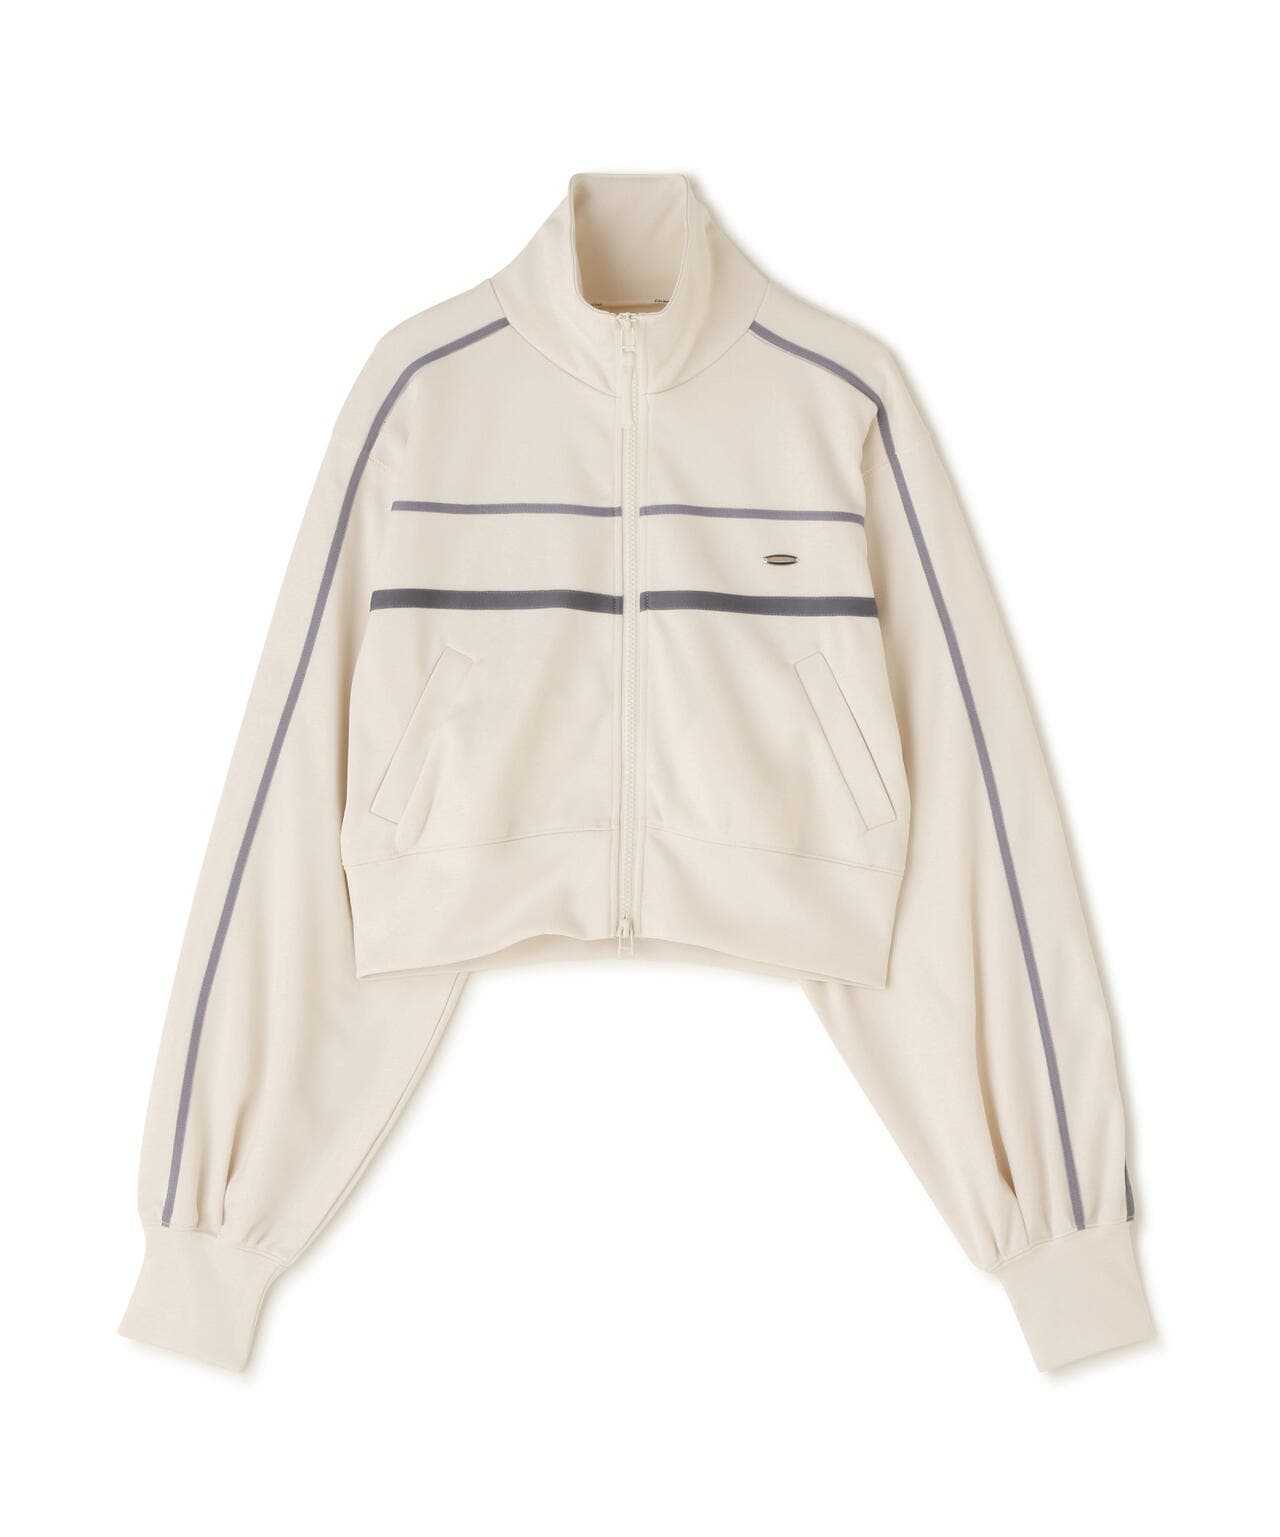 MAISON SPECIAL/メゾンスペシャル/Double Line Jersey Jacket | ROYAL 